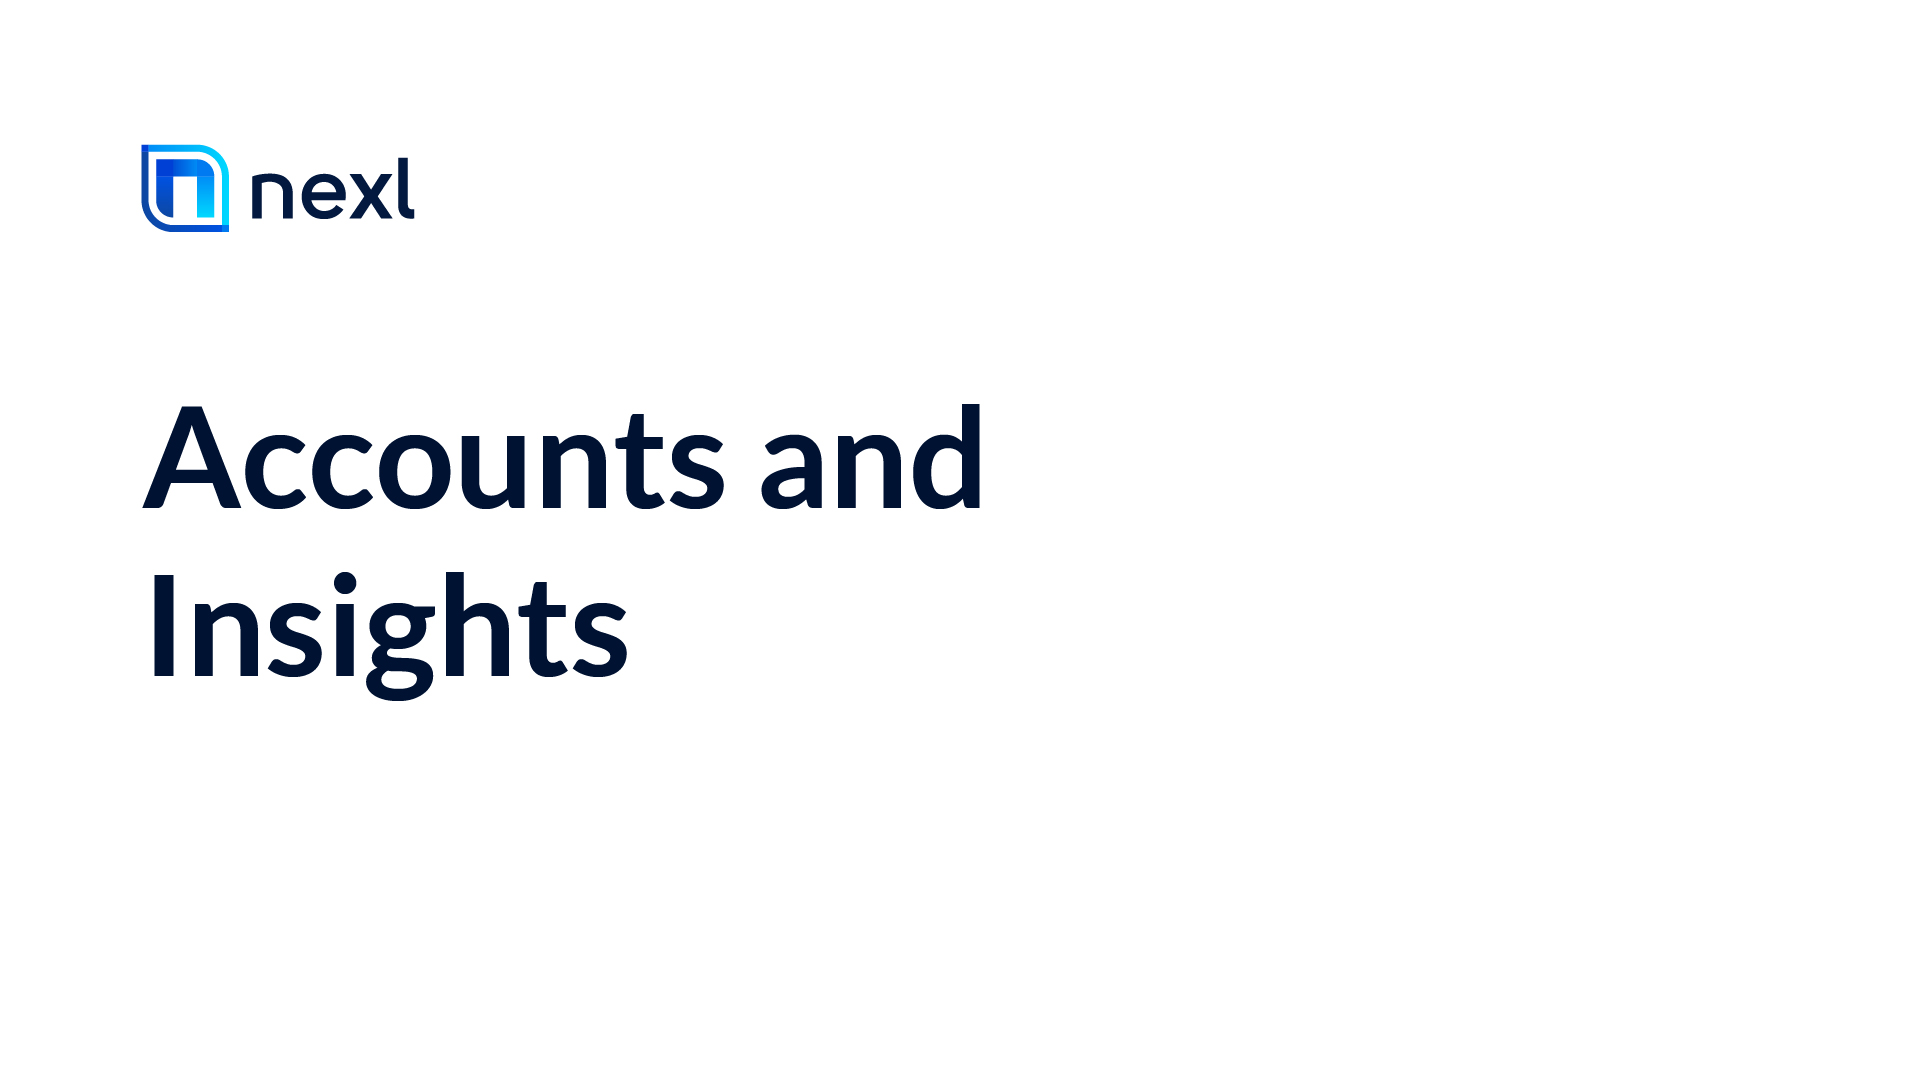 Accounts and Insights